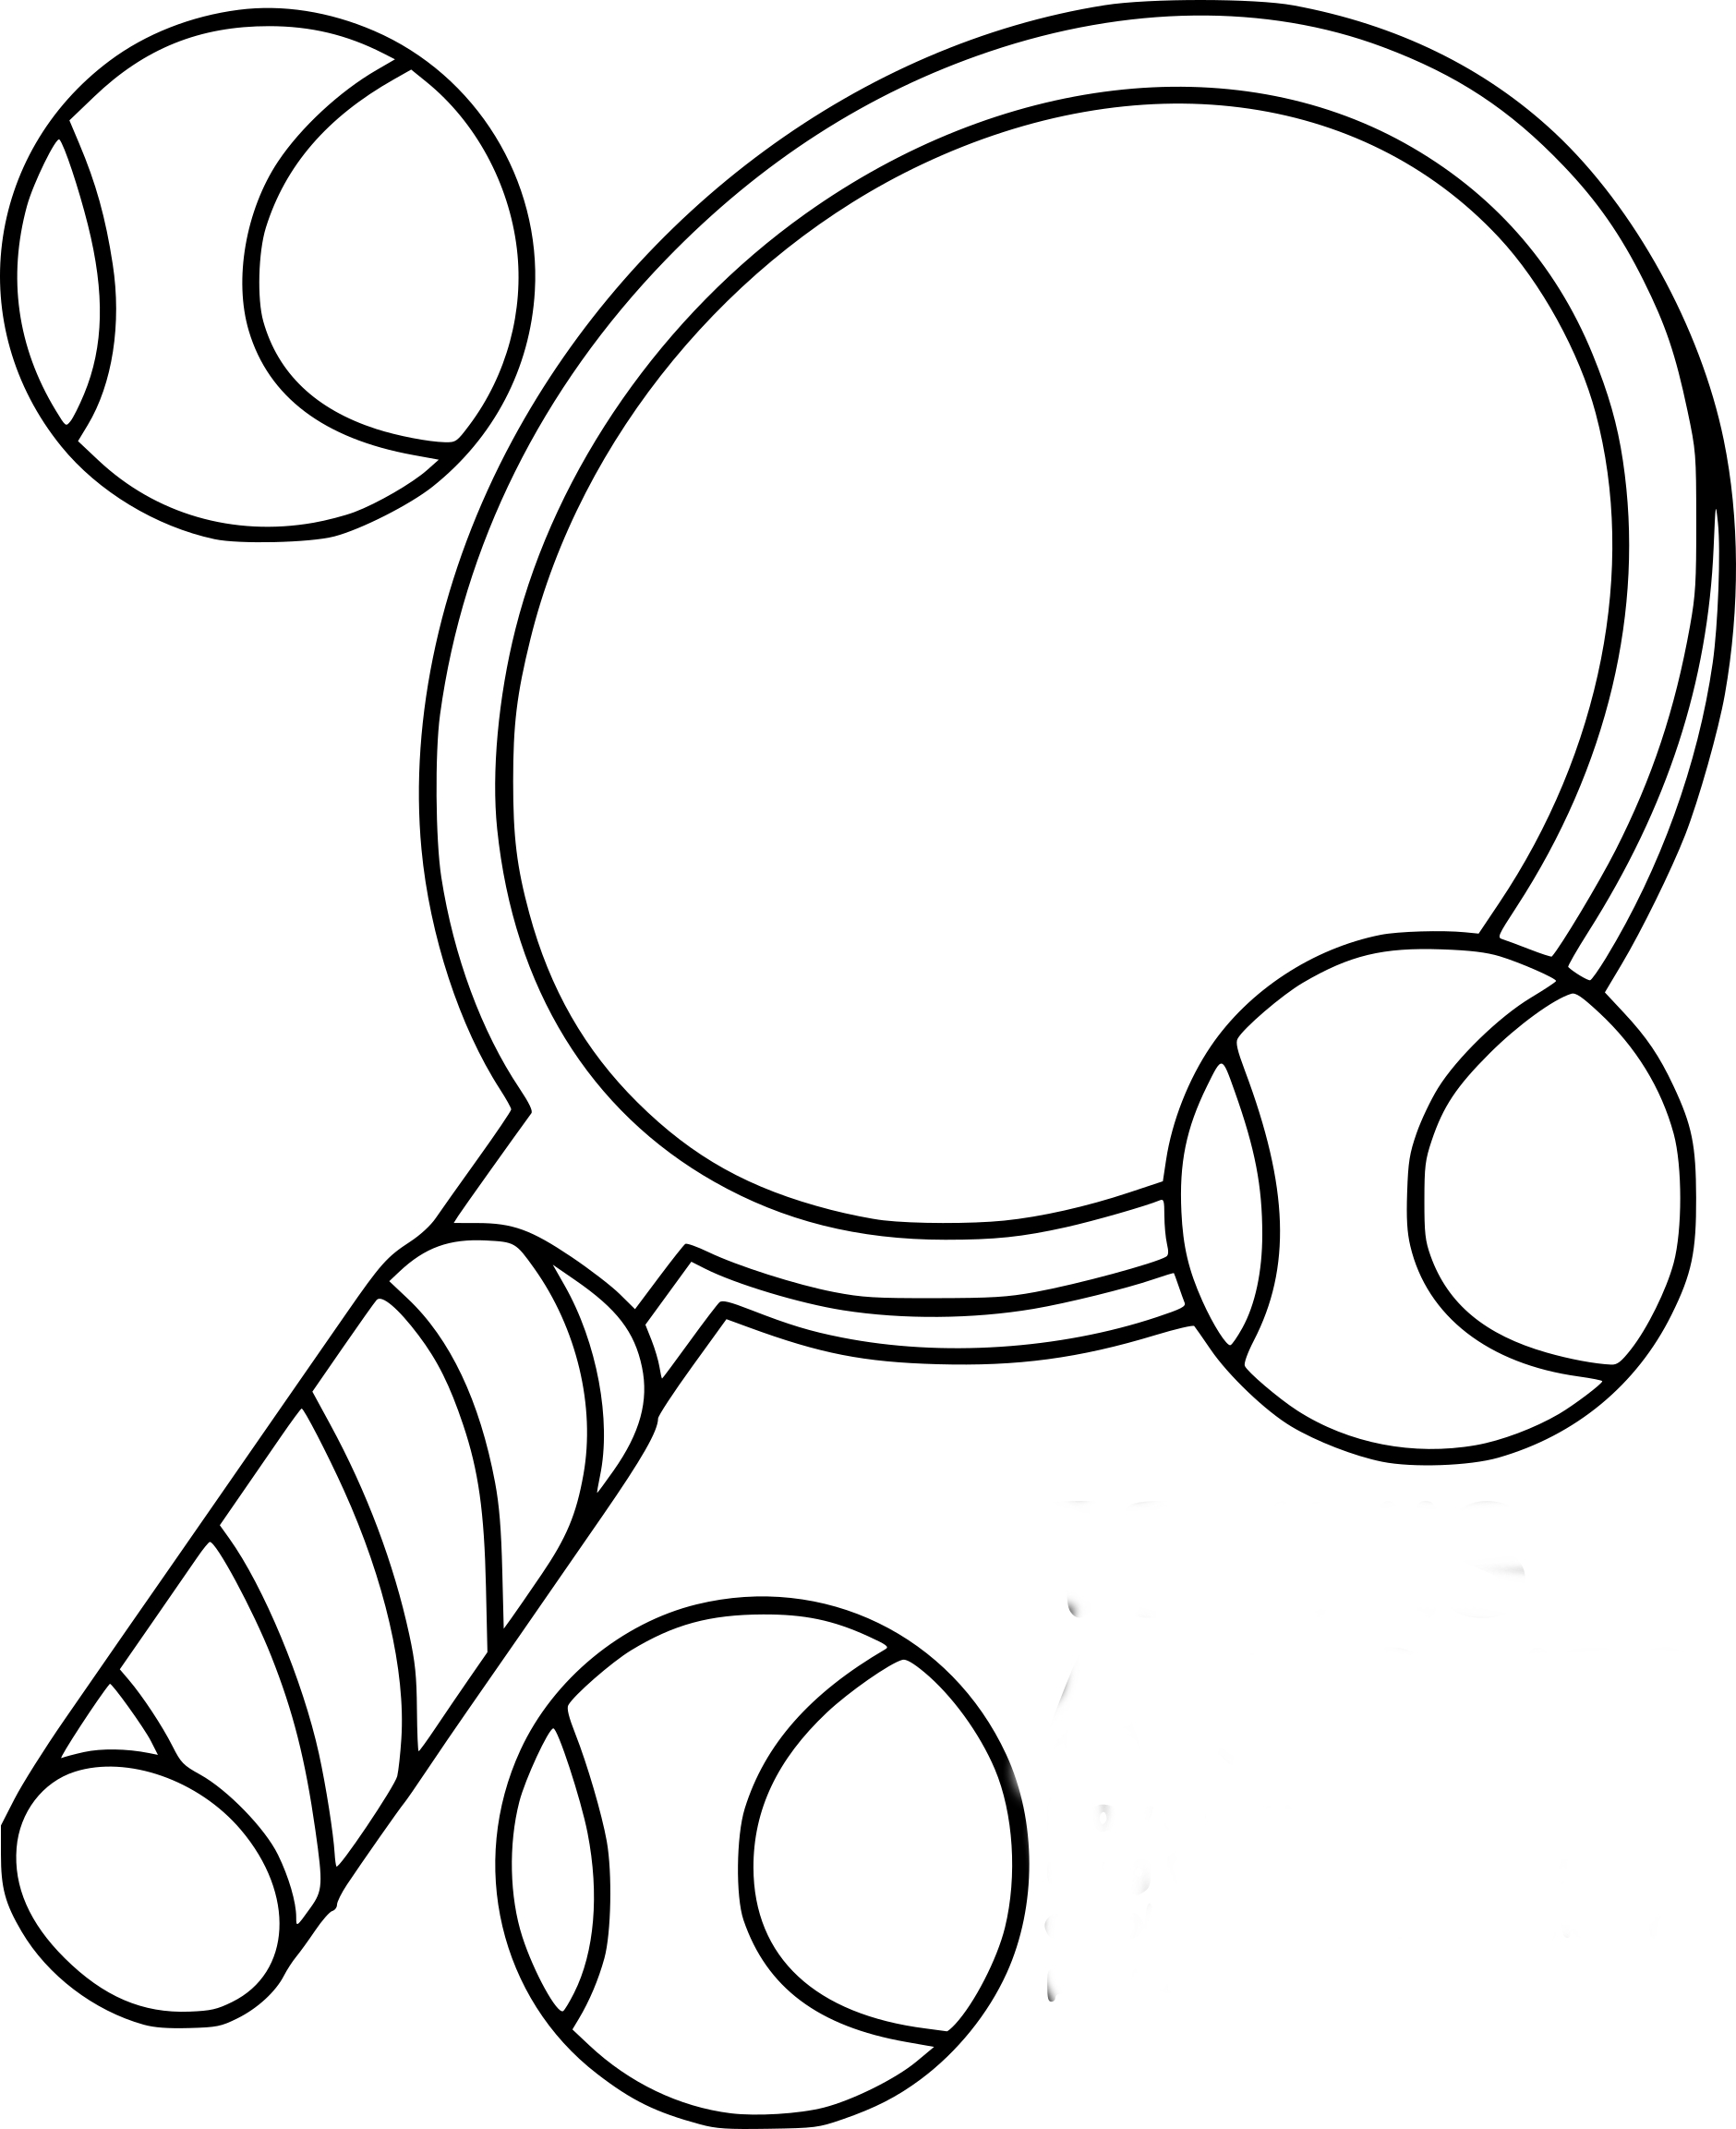 Tennis Racket drawing and coloring page